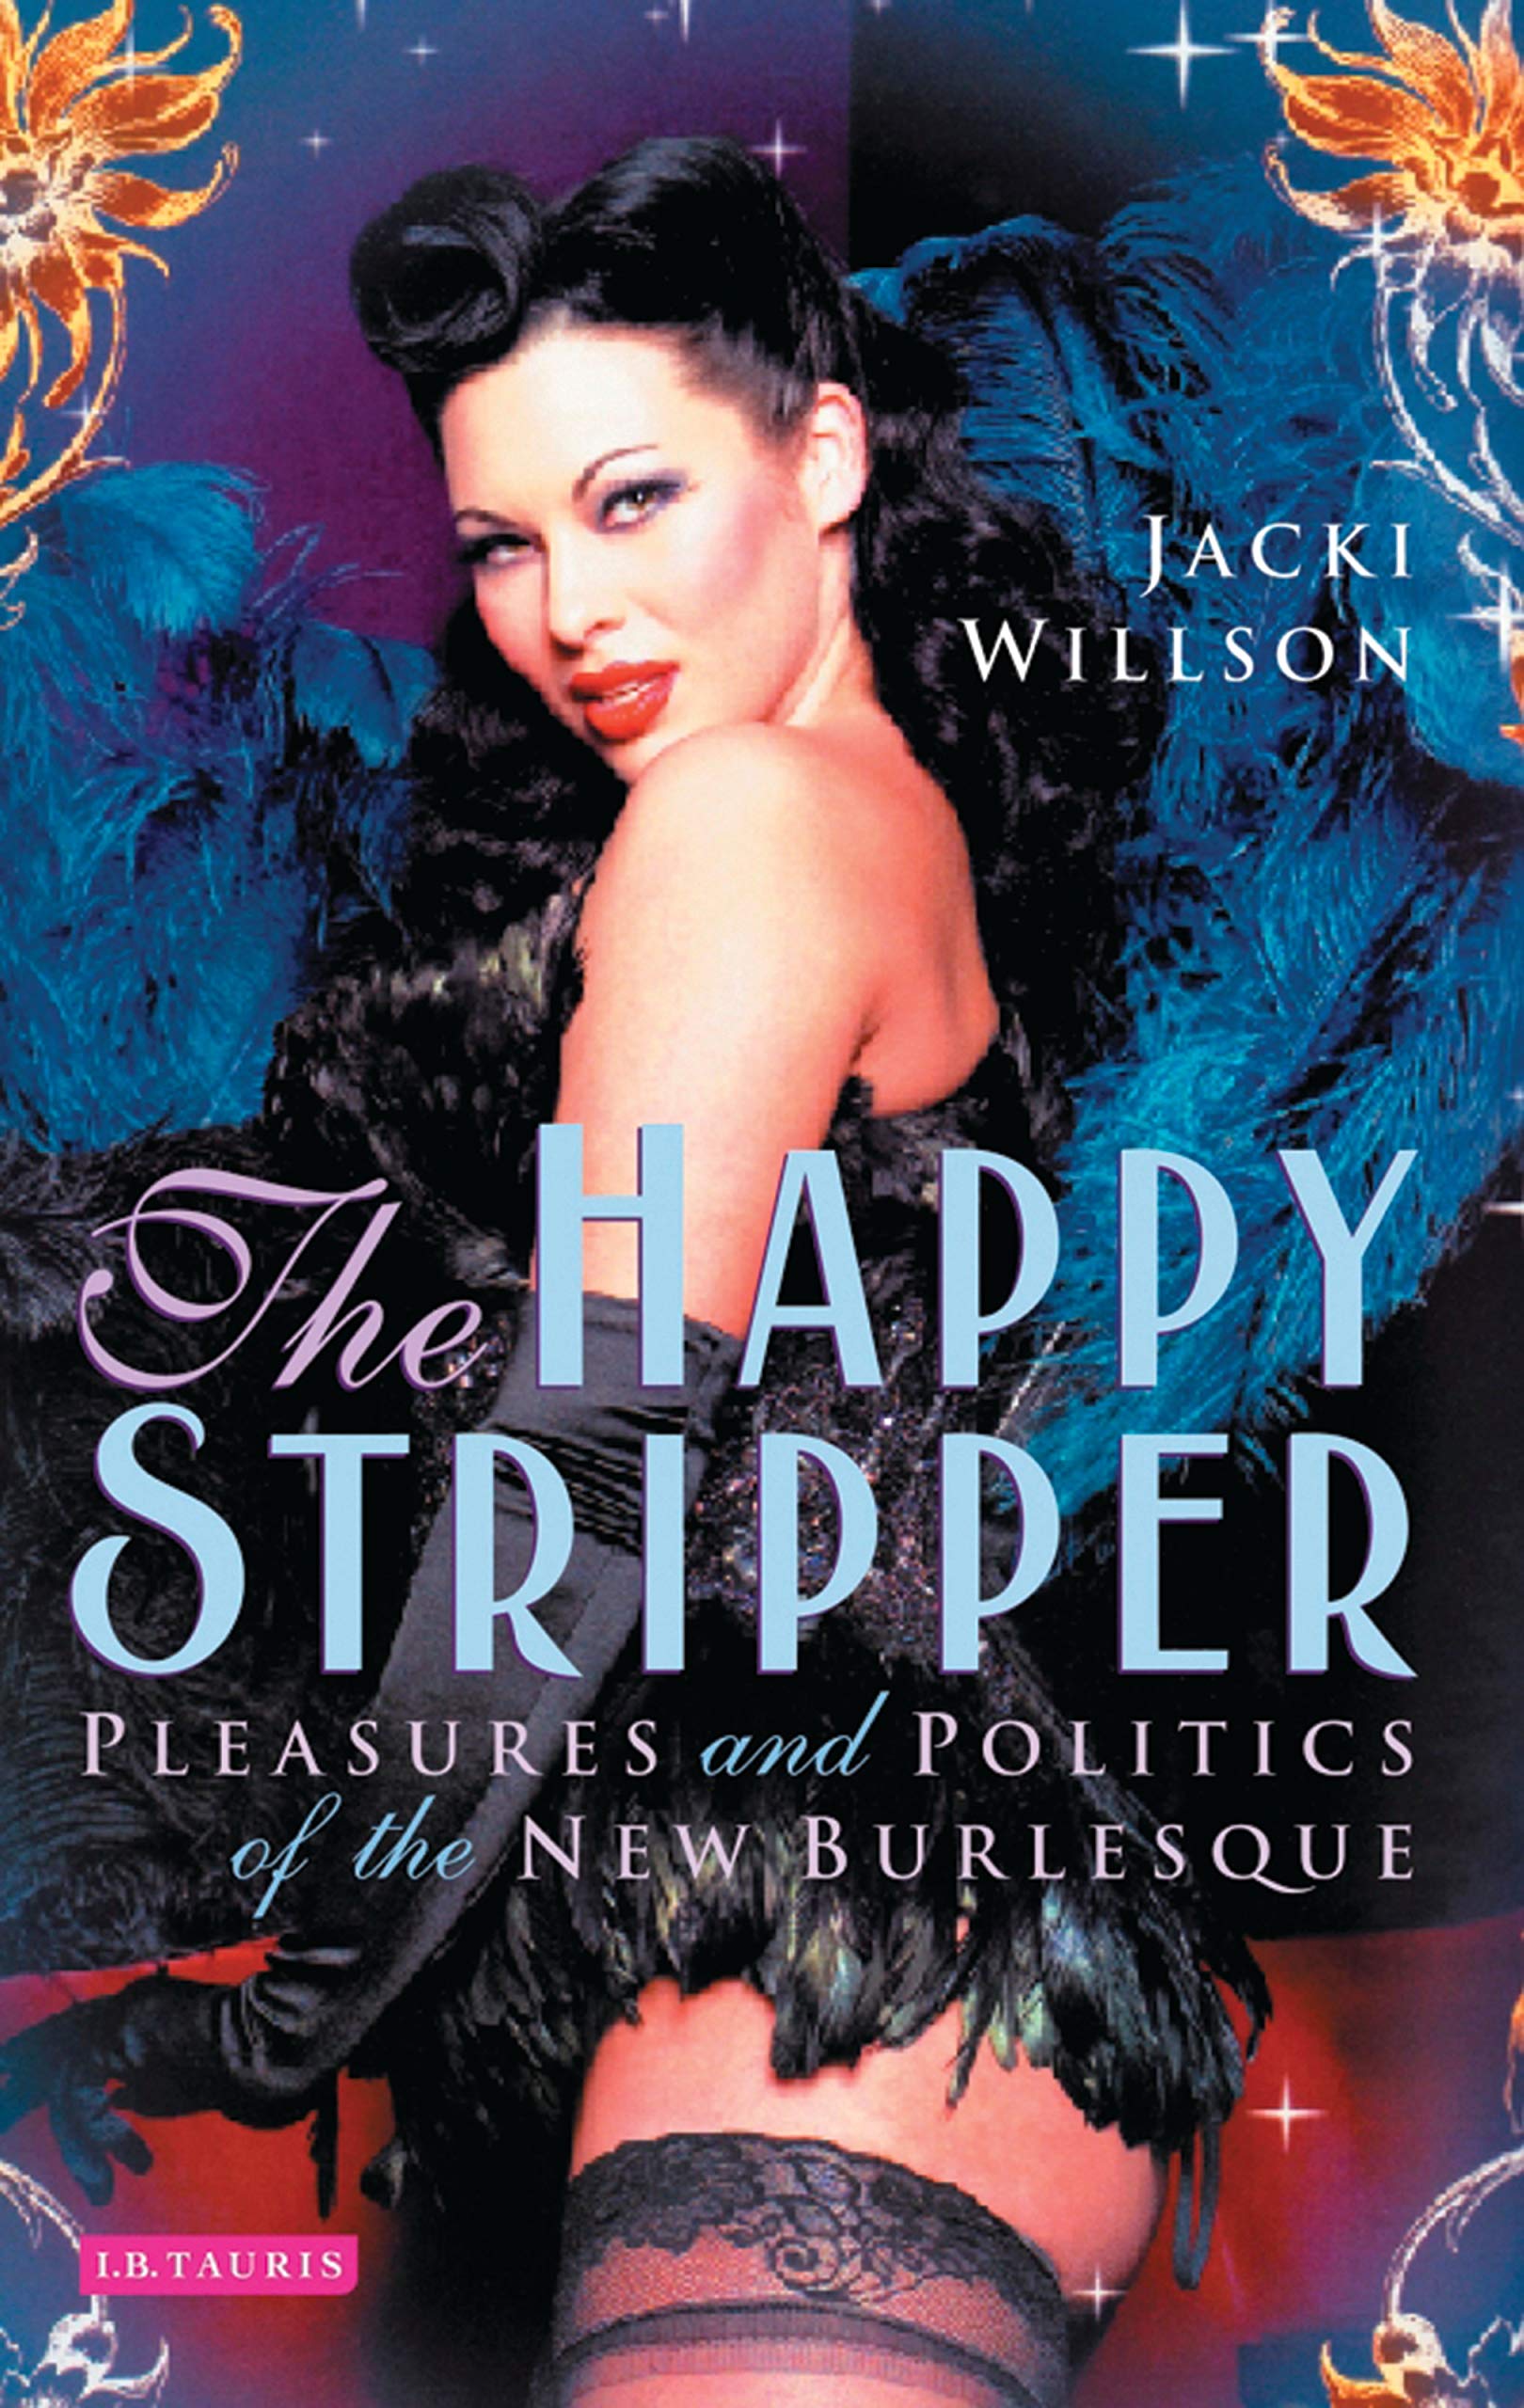 The happy stripper